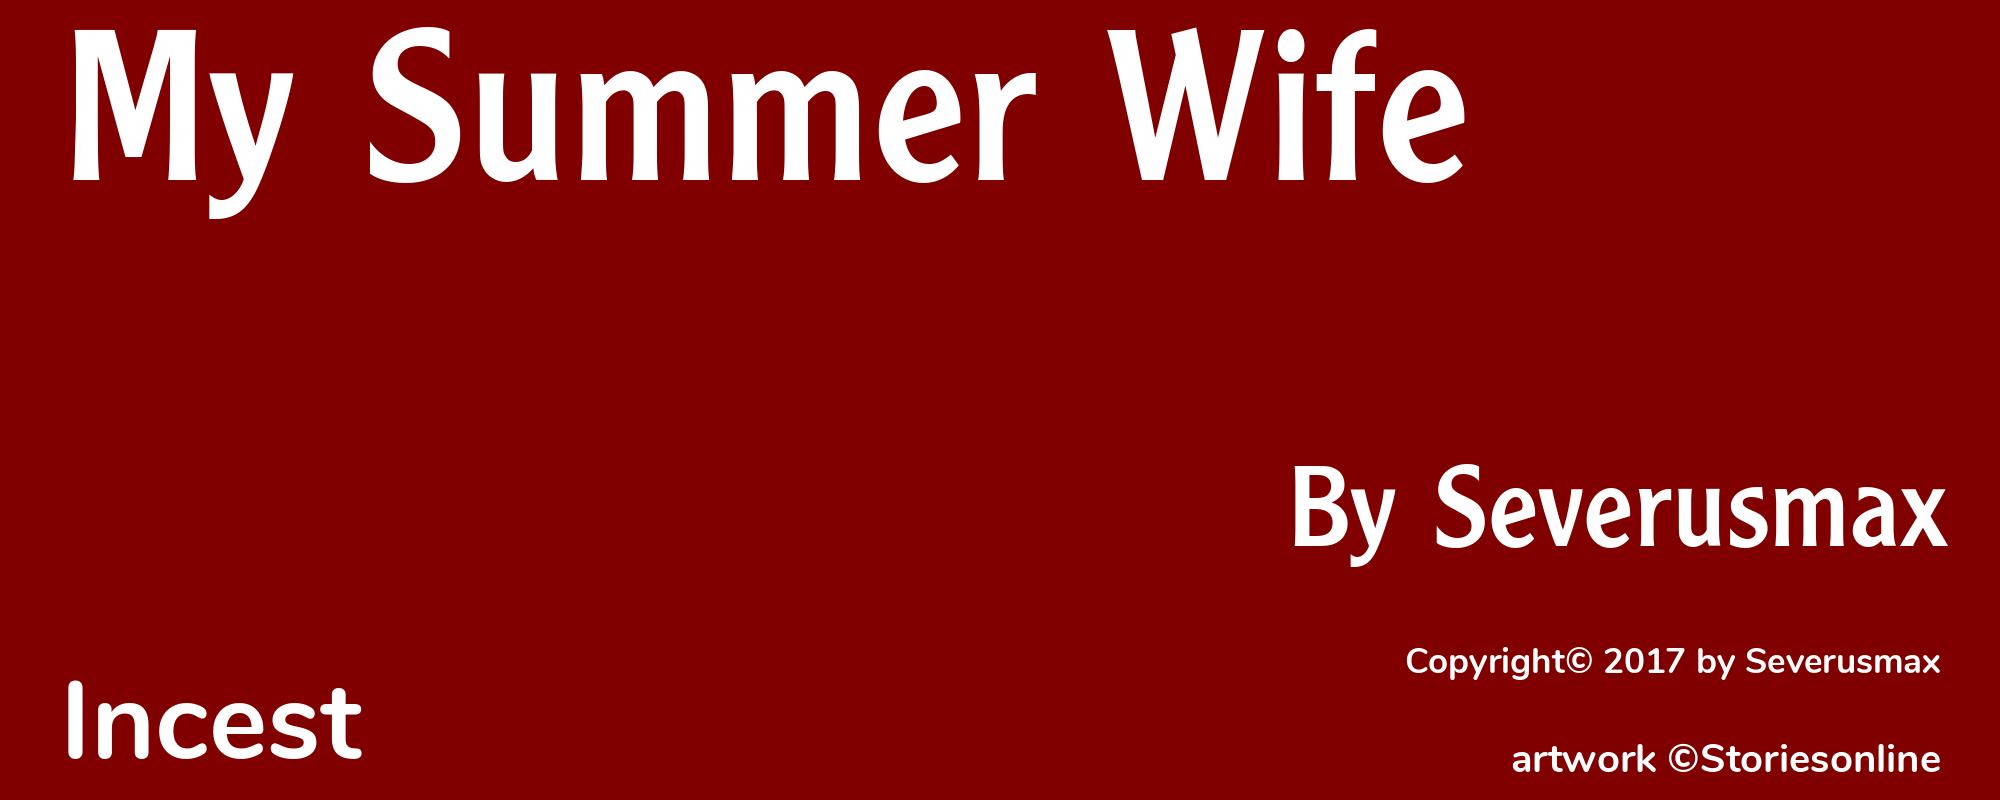 My Summer Wife - Cover